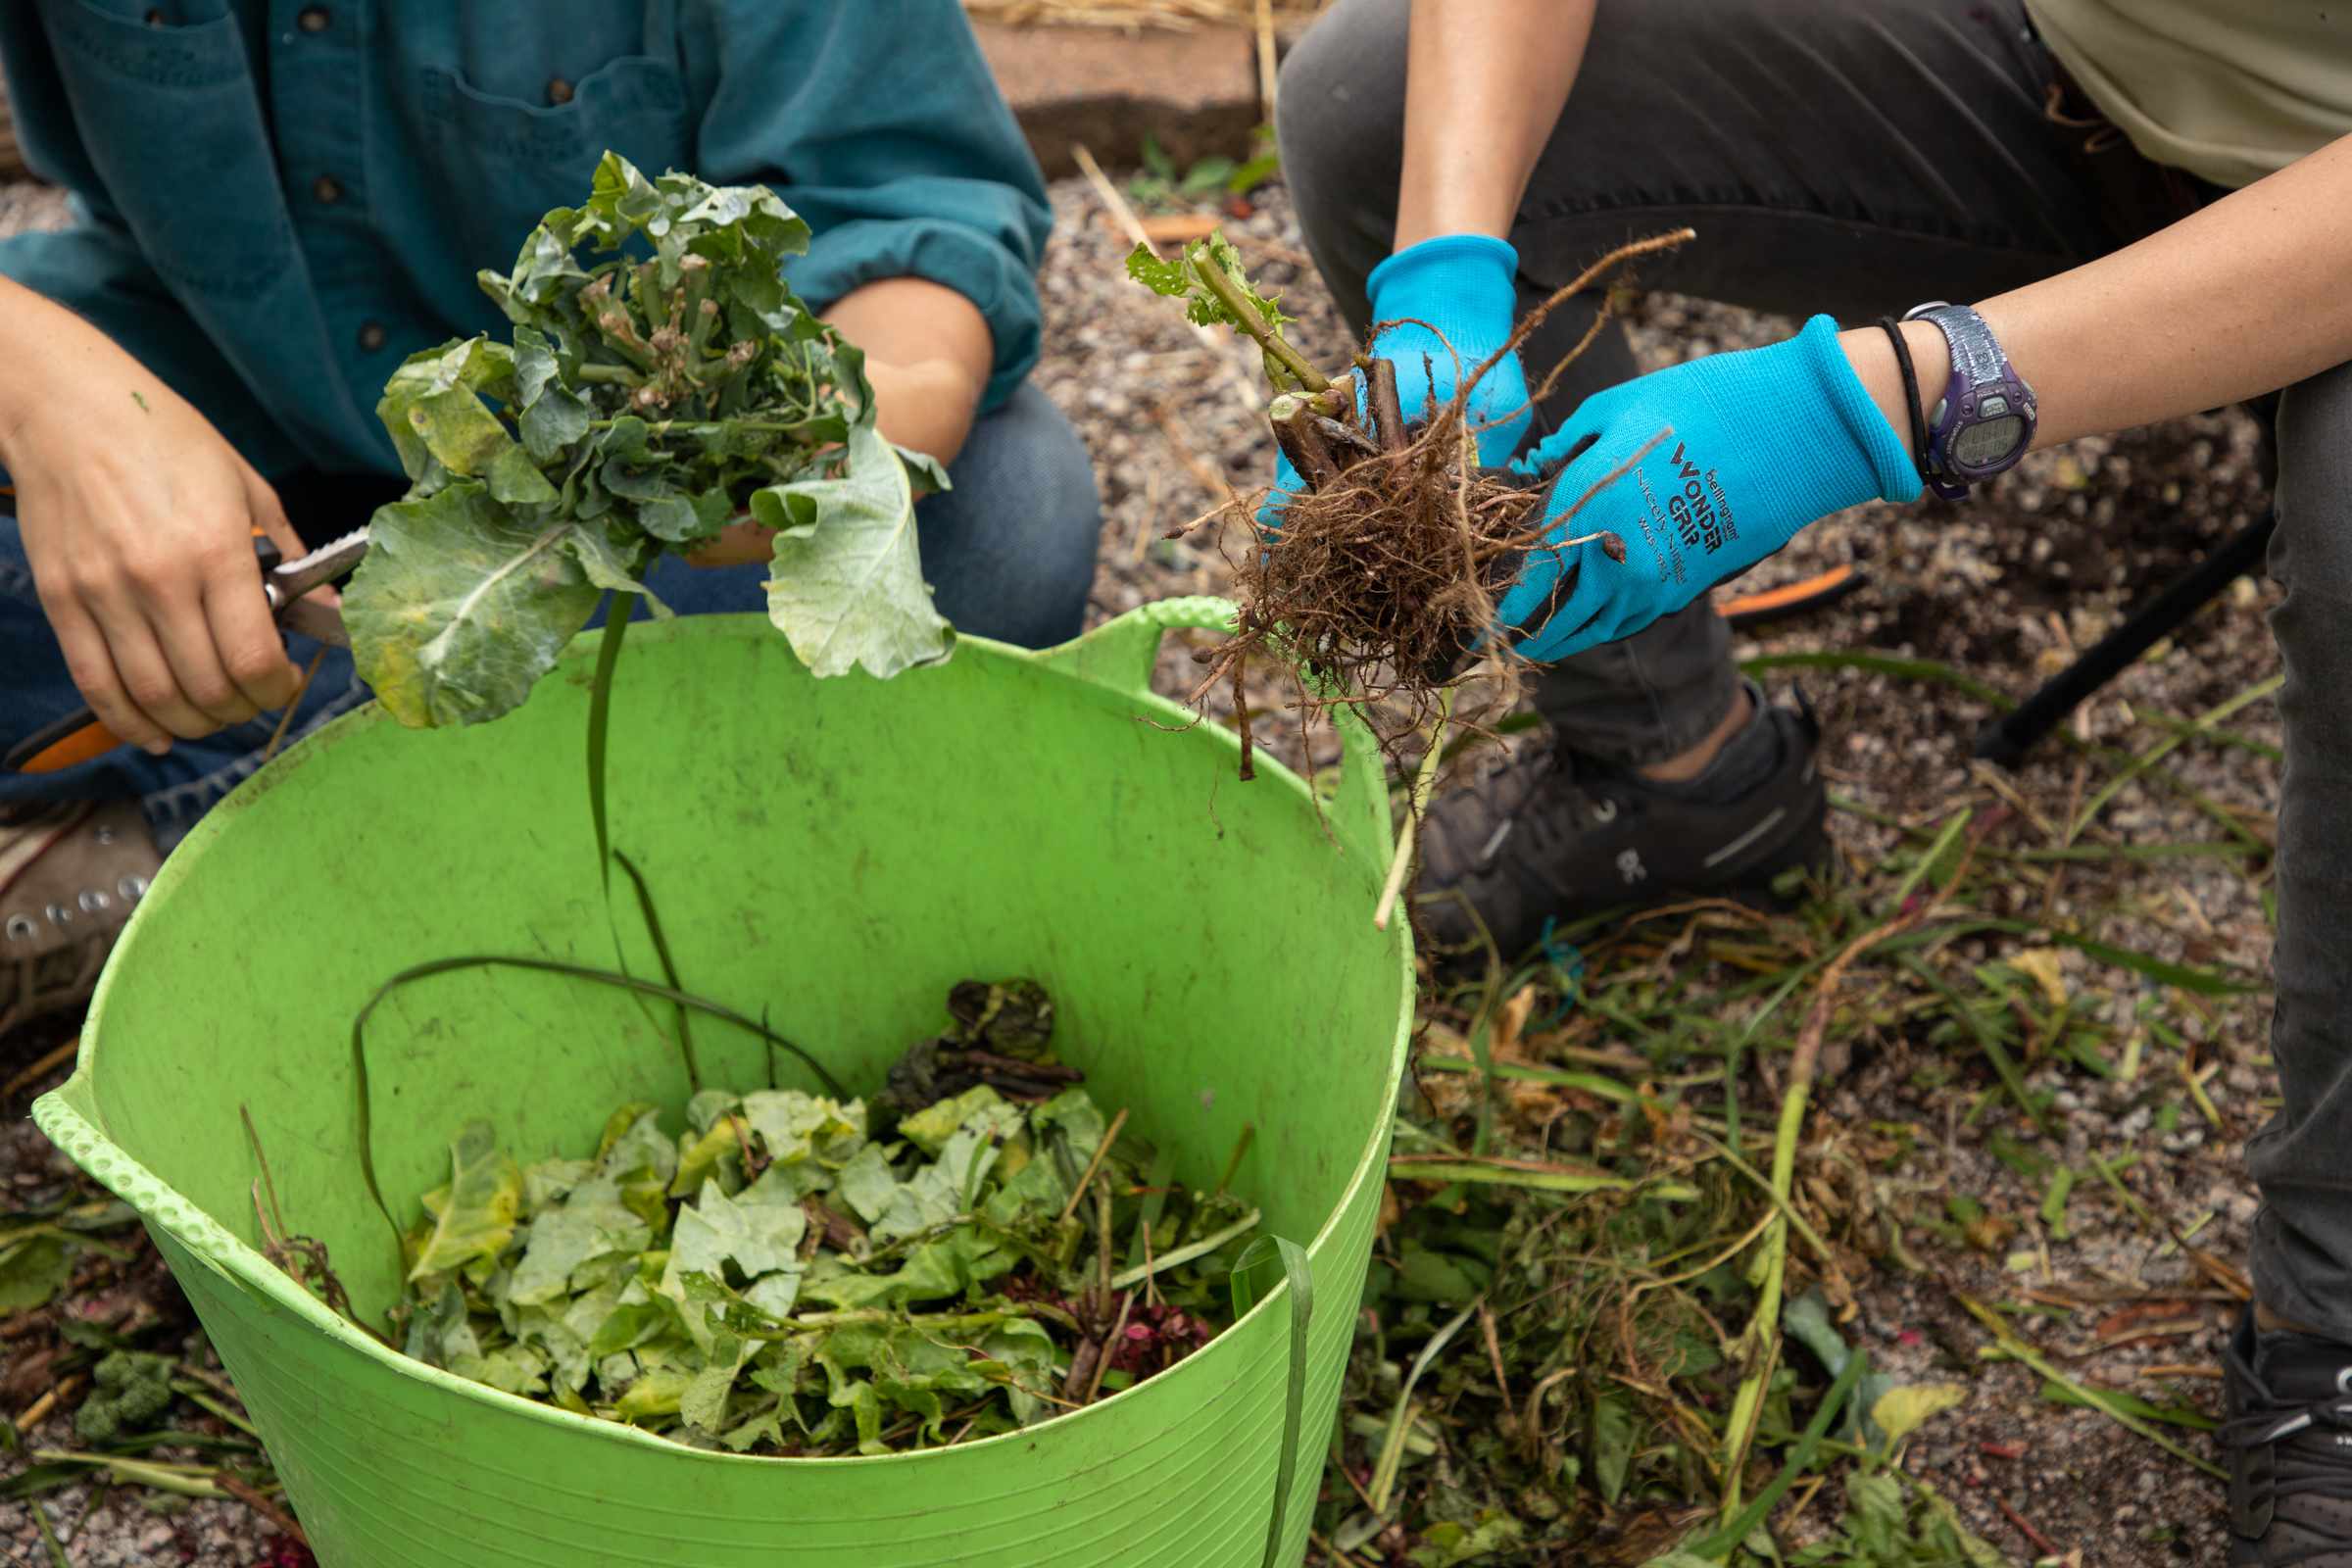 two people crouch in front of a bucket full of compost, both holding plants in their hands. one is wearing gloves, the other is holding shears in adition to a plant